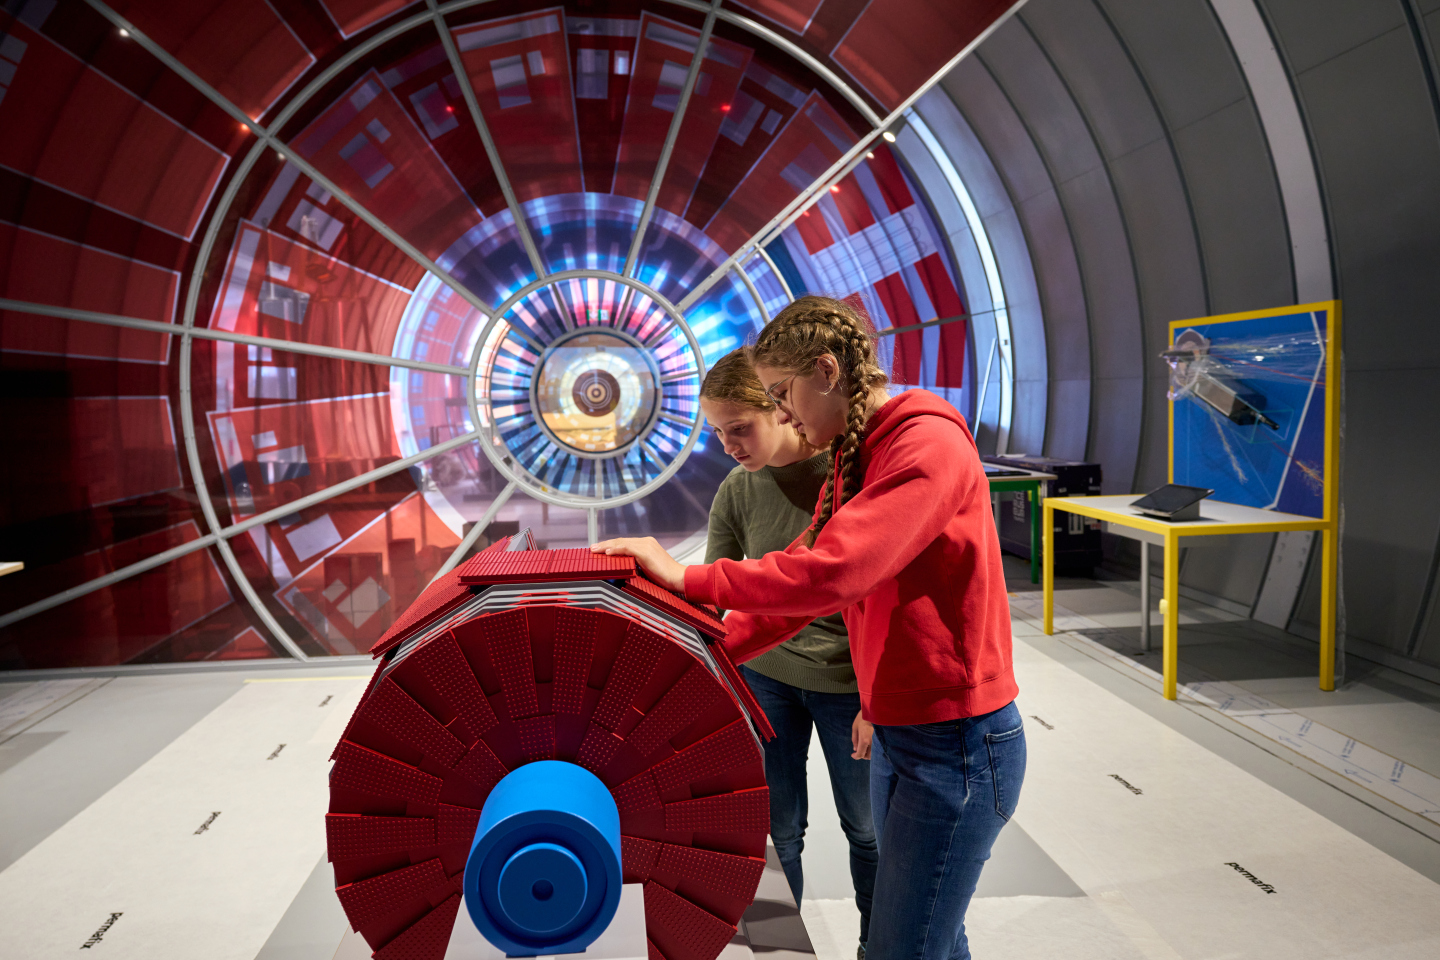 Children visiting Science Gateway’s Collide exhibition. This model detector is tactile to allow visitors with visual impairments to discover the detector’s components. (Image: CERN)